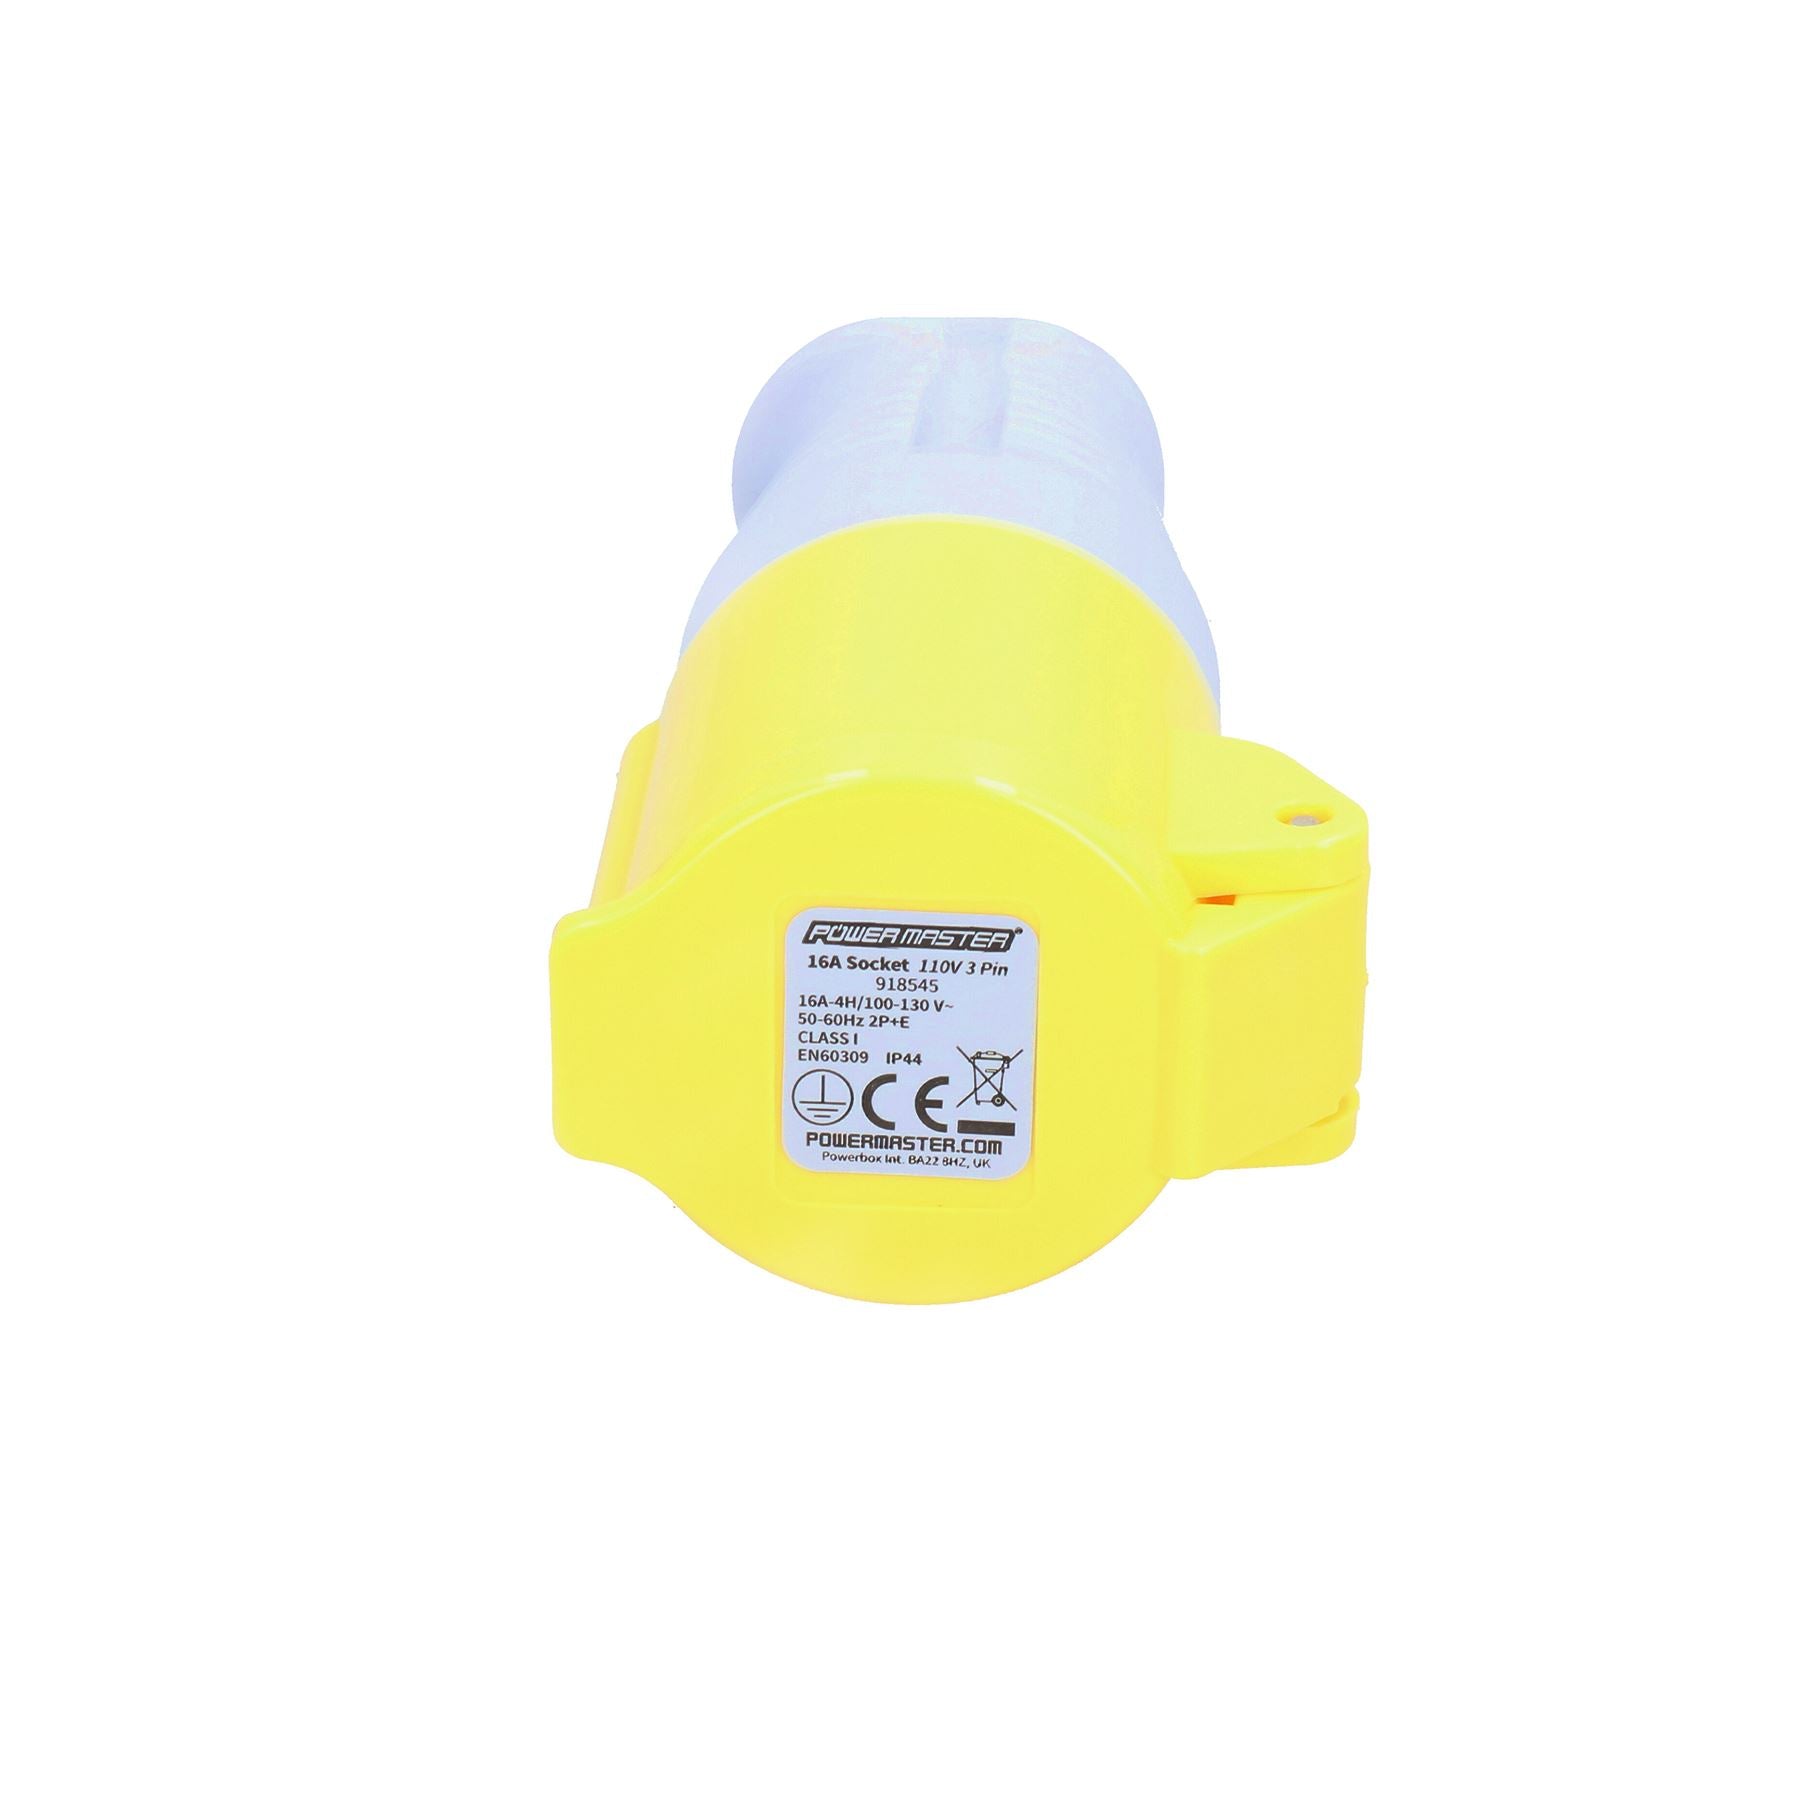 Mains 110v 16A Site Power Socket Yellow Building Construction Tools IP44